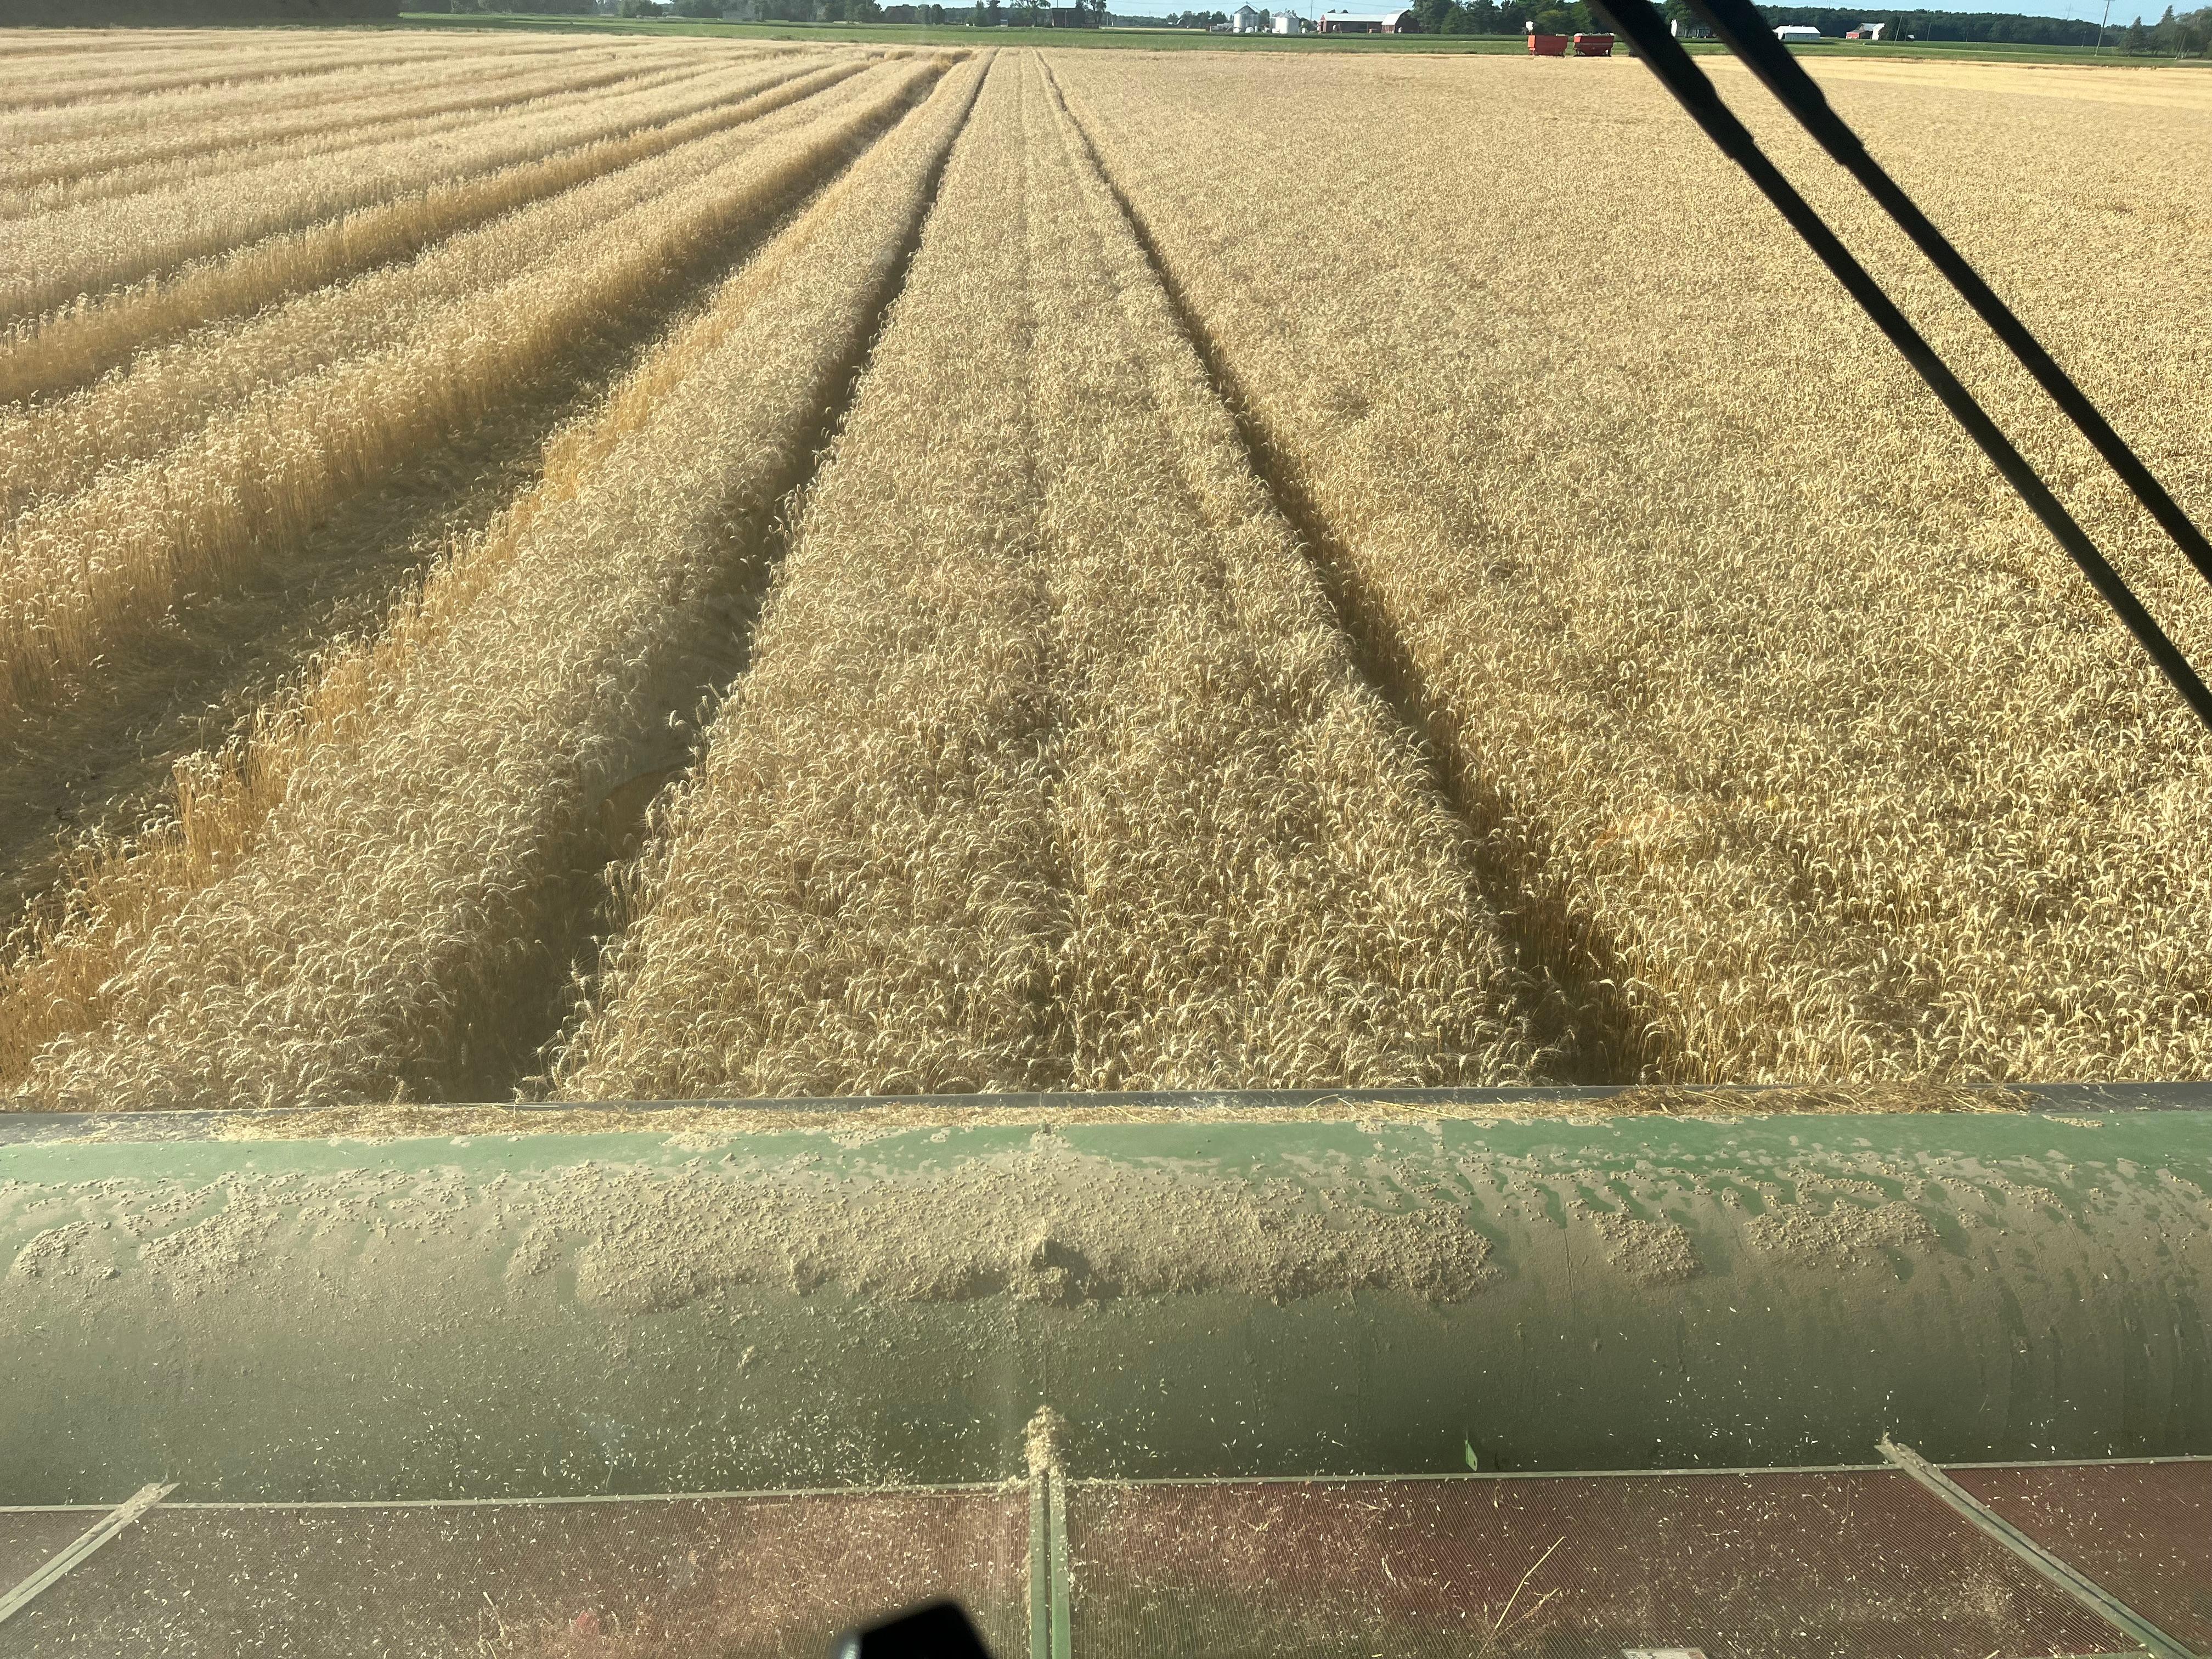 The view of a wheat field from inside a combine harvester.